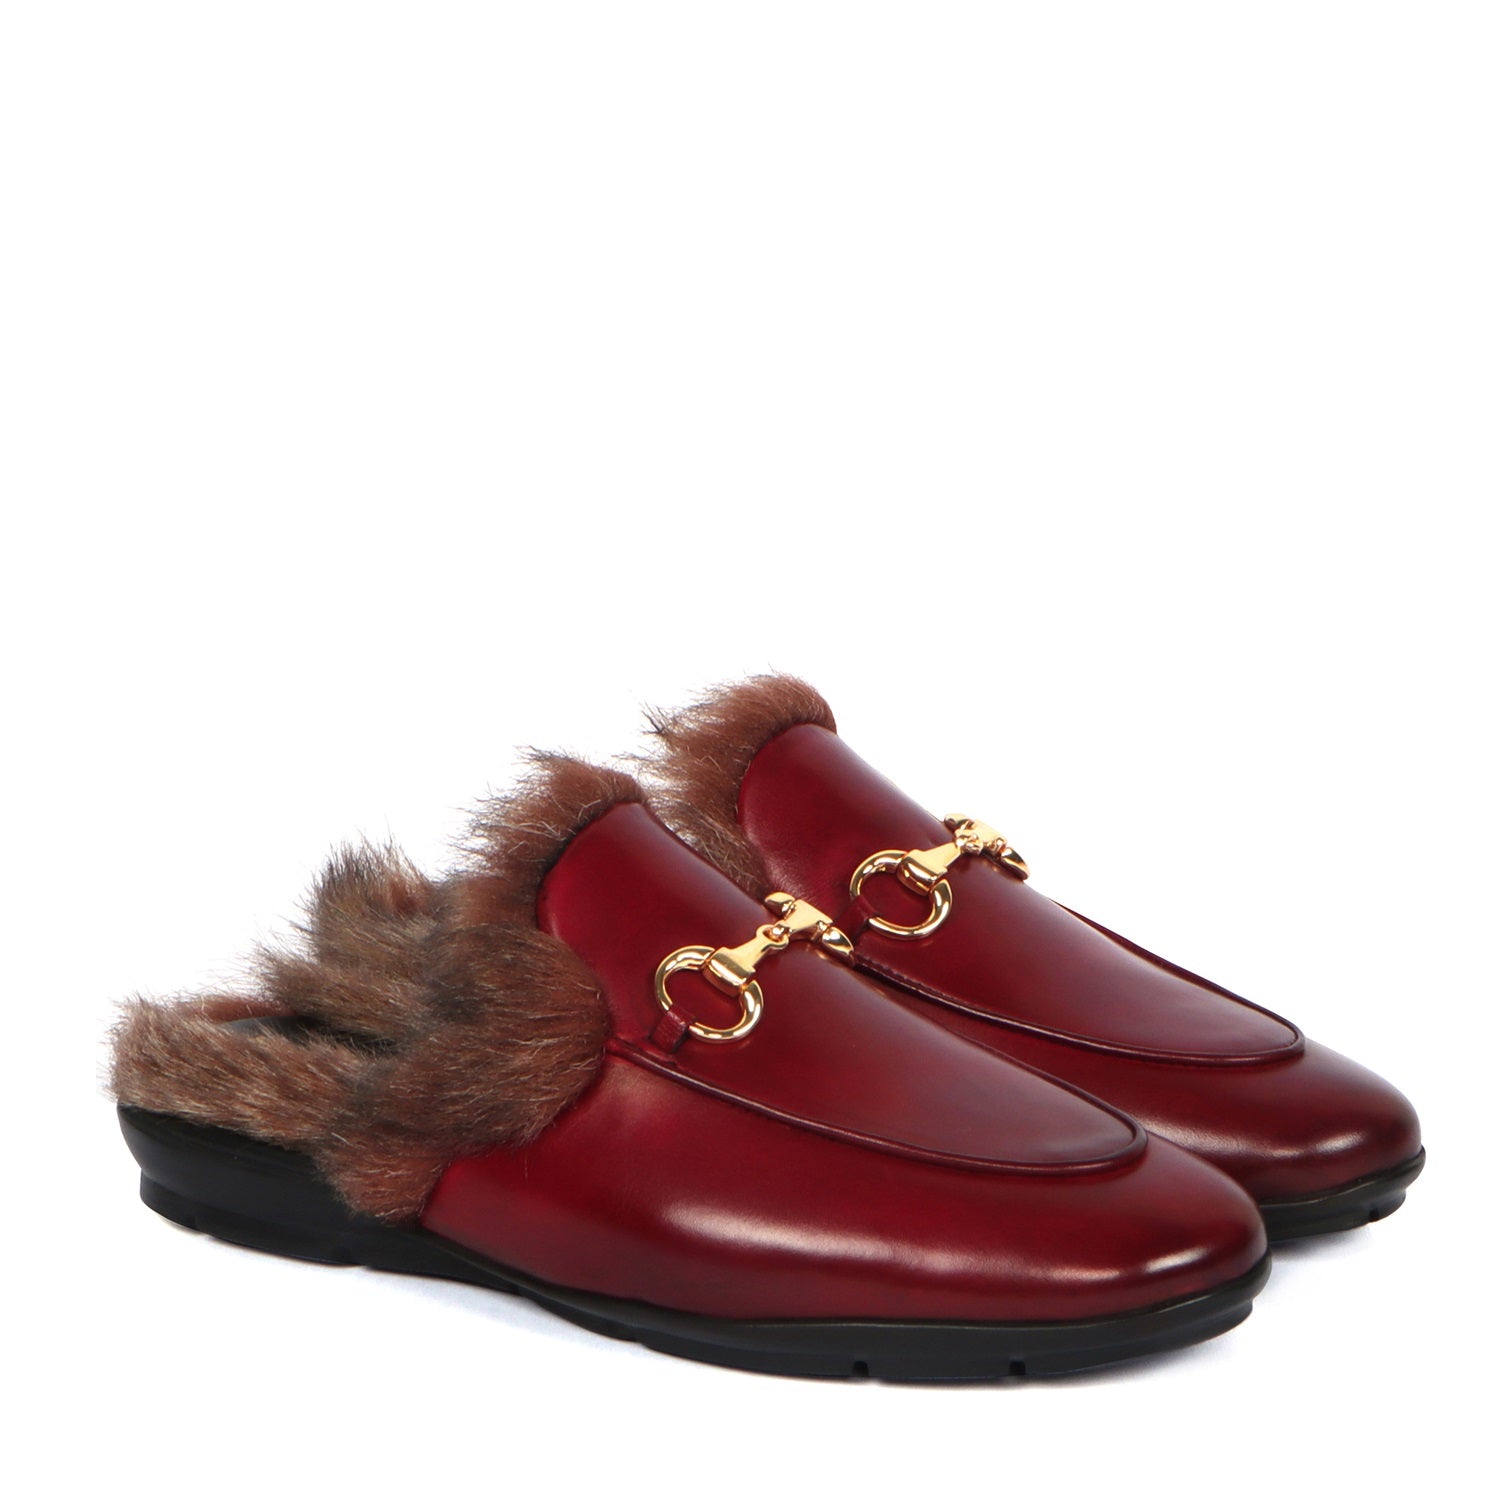 Furry Mules Light Weight Wine Leather Formal Horsebit Buckle With Slipper Opening at The Back (Summer Special) By Brune & Bareskin